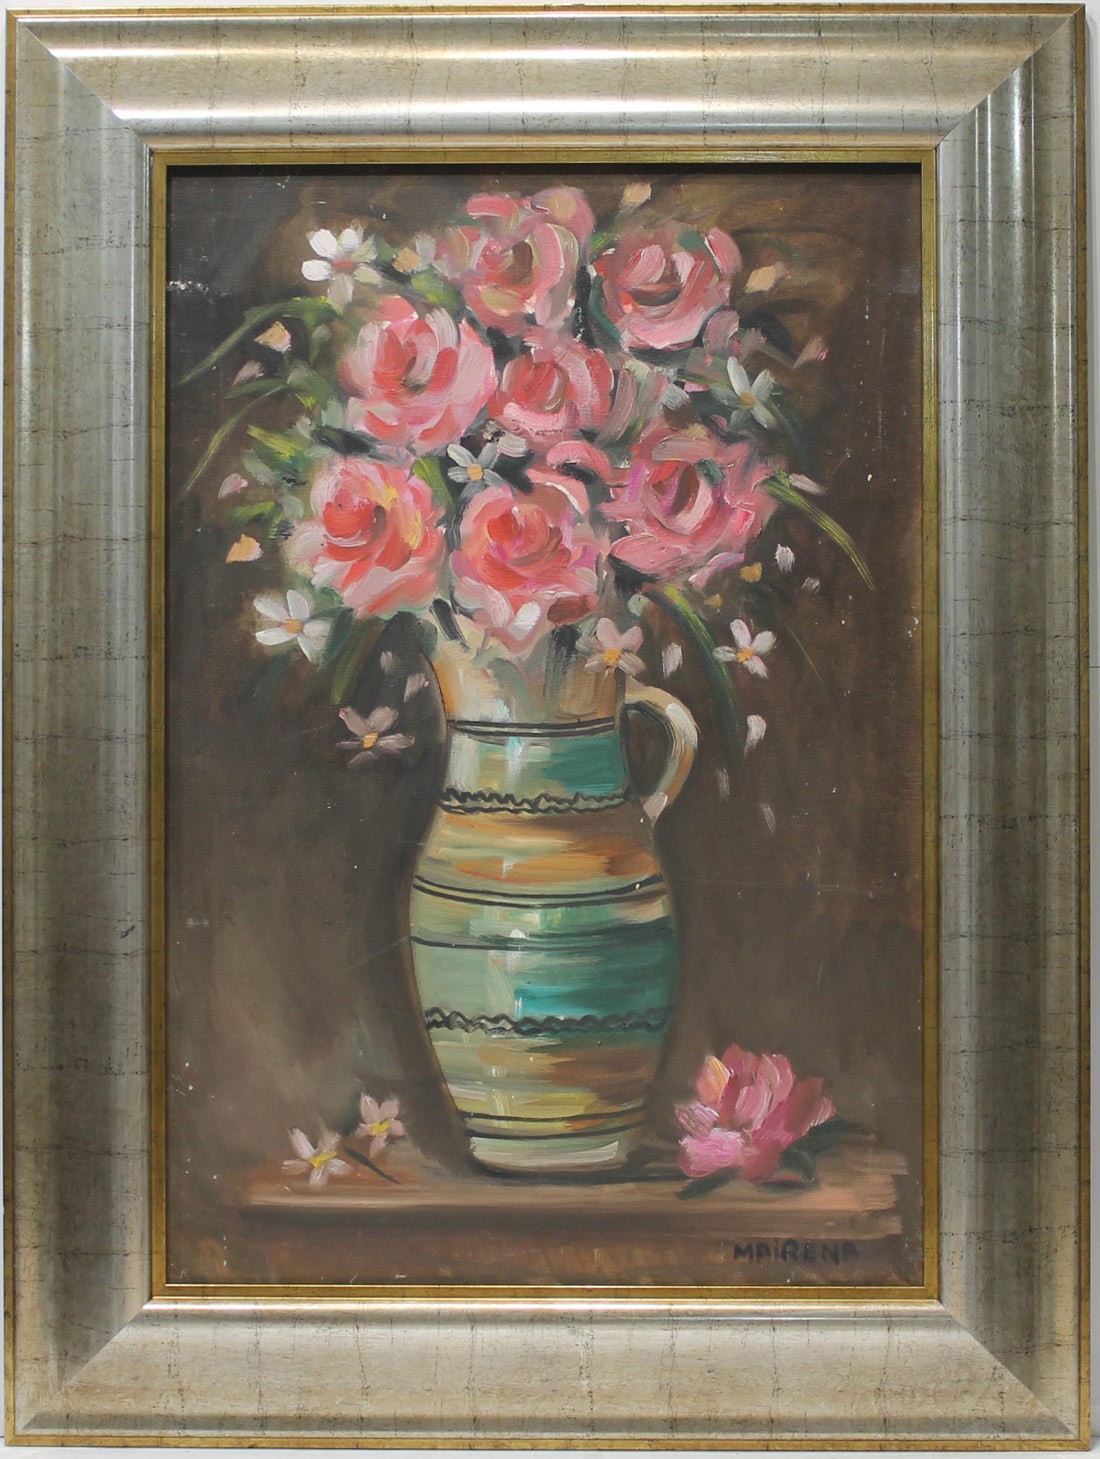 Maria Mairena: Vase with flowers